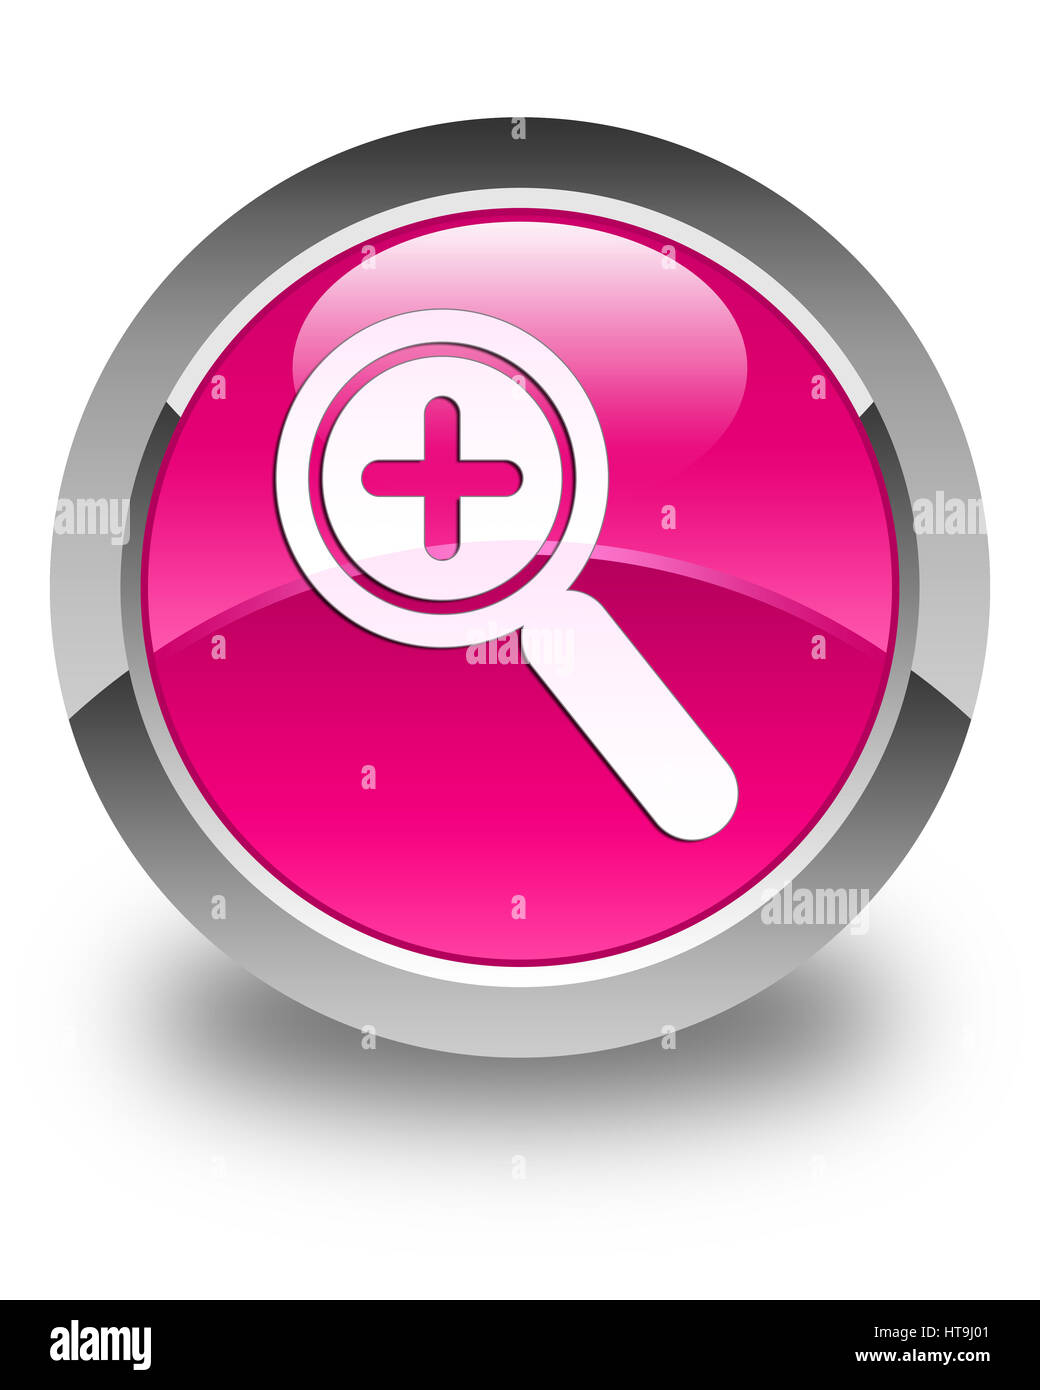 Zoom in icon isolated on glossy pink round button abstract illustration Stock Photo